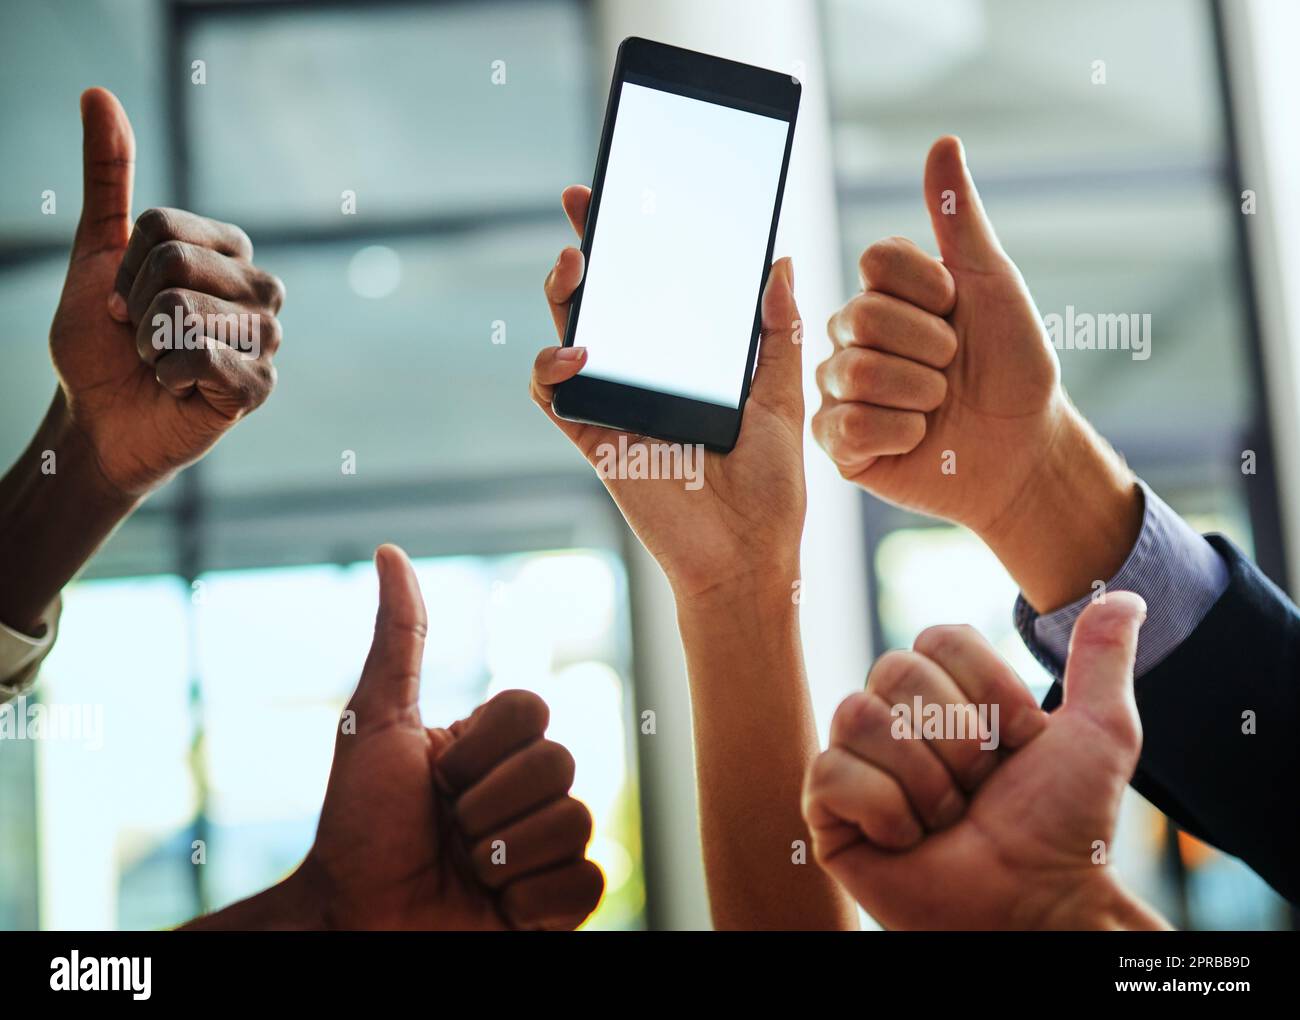 Thumbs up, support and blank phone screen shown by professional corporate business people in an office together. Employees and colleagues showing agreement while holding a device with information Stock Photo